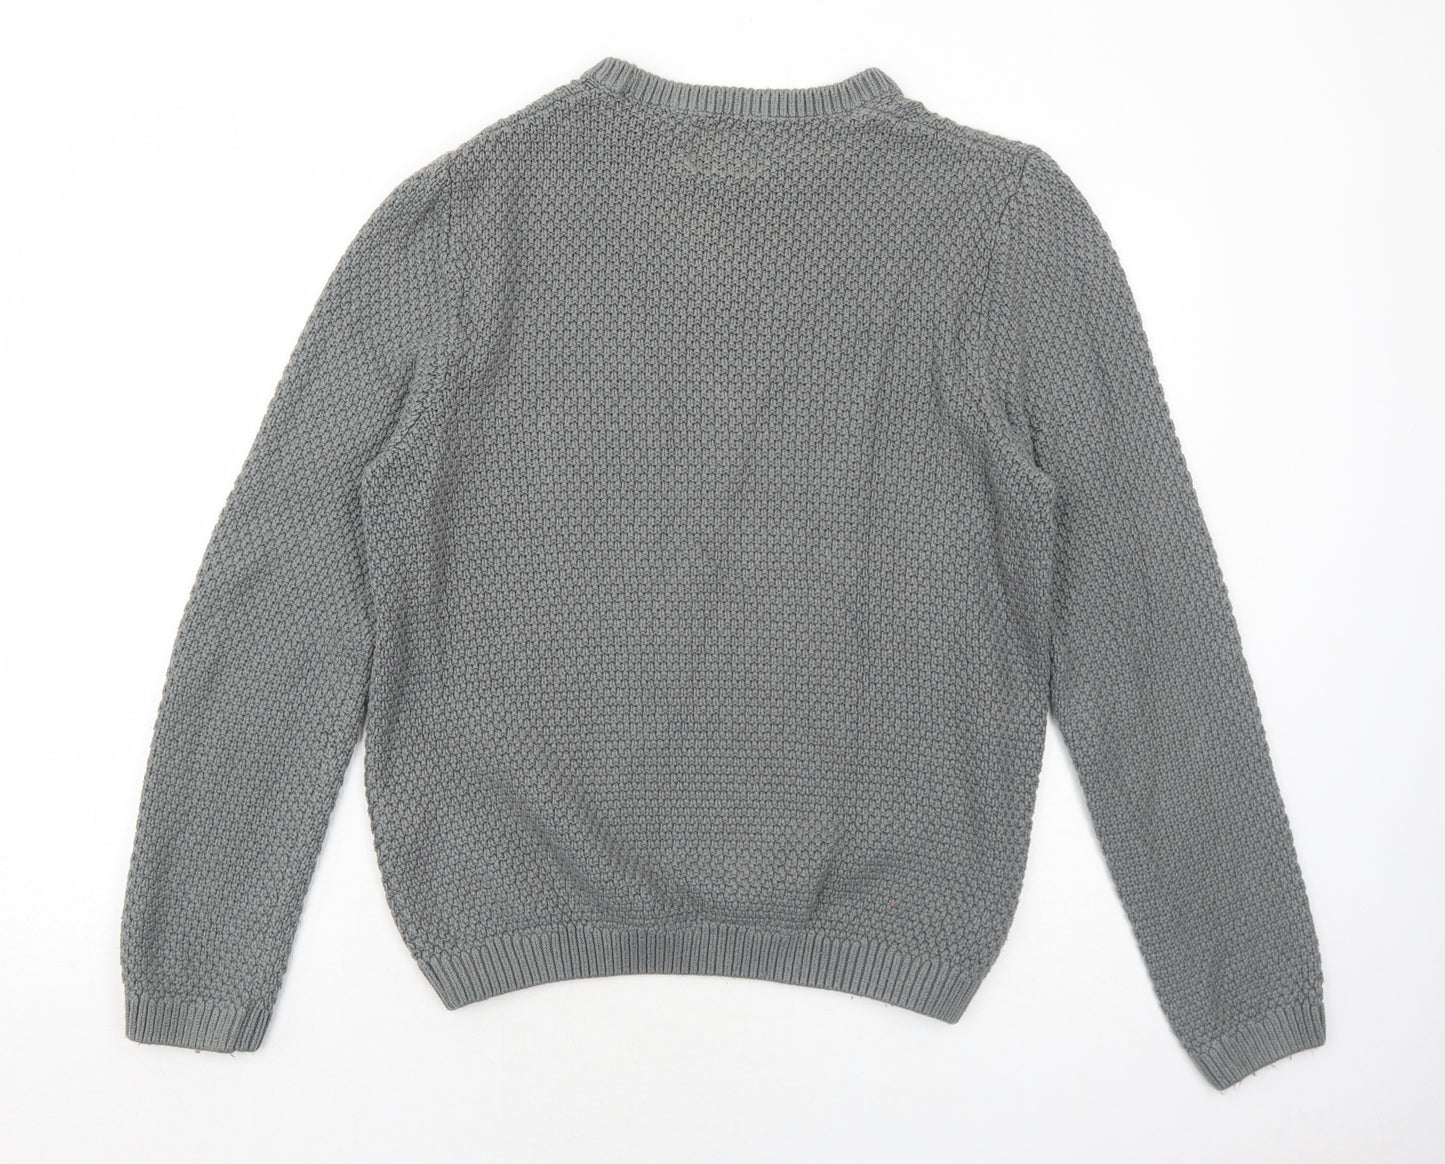 Topman Mens Grey Round Neck Cotton Pullover Jumper Size M Long Sleeve